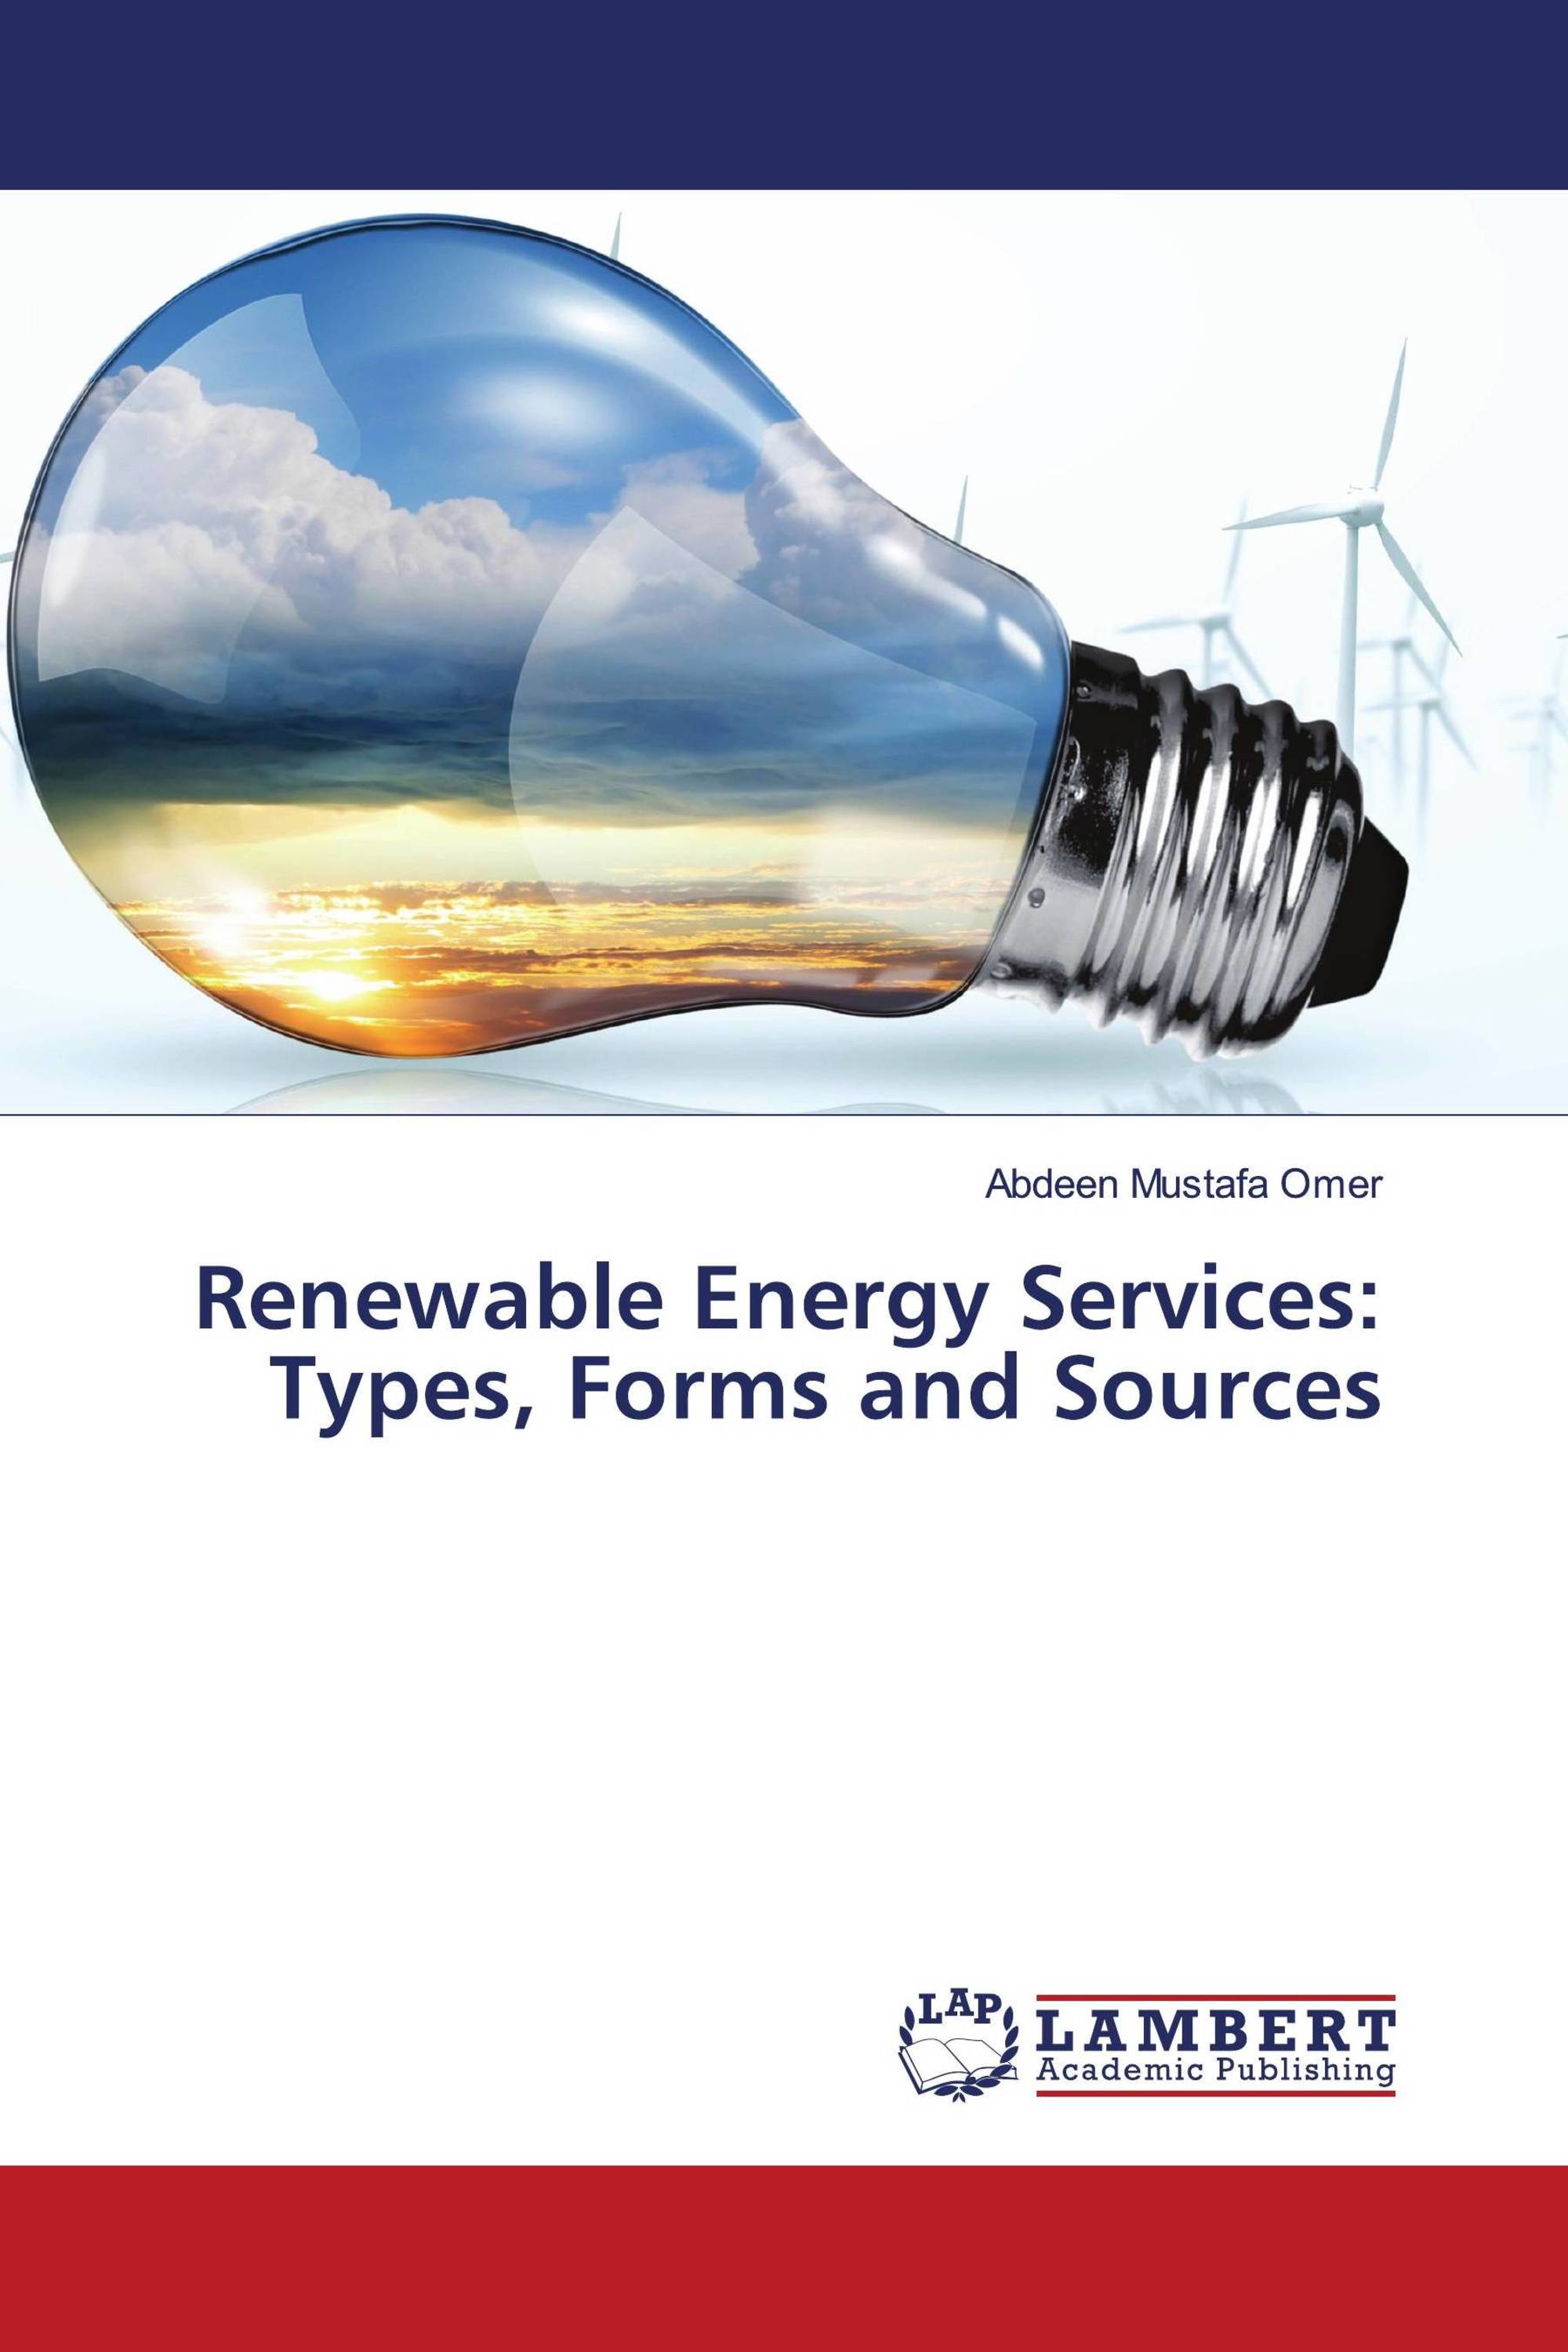 Renewable Energy Services: Types, Forms and Sources